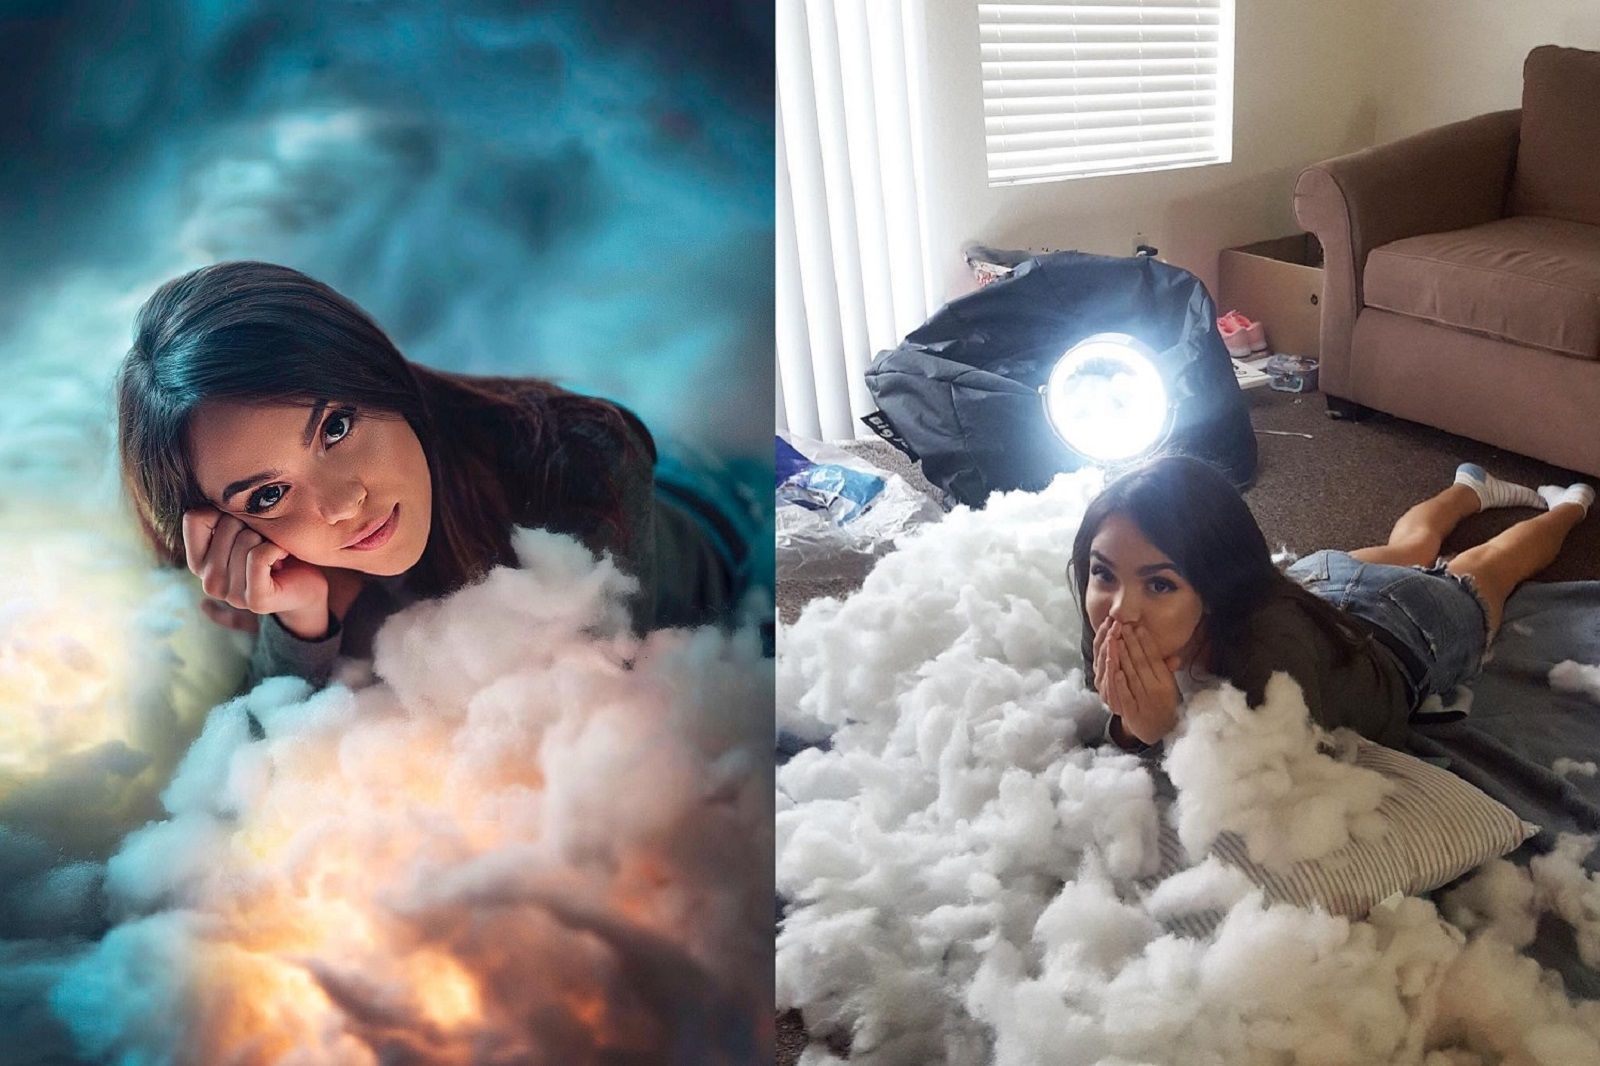 Behind The Scenes Of Instagram This Artist Shows Us What Goes Into Beautiful Snaps image 1